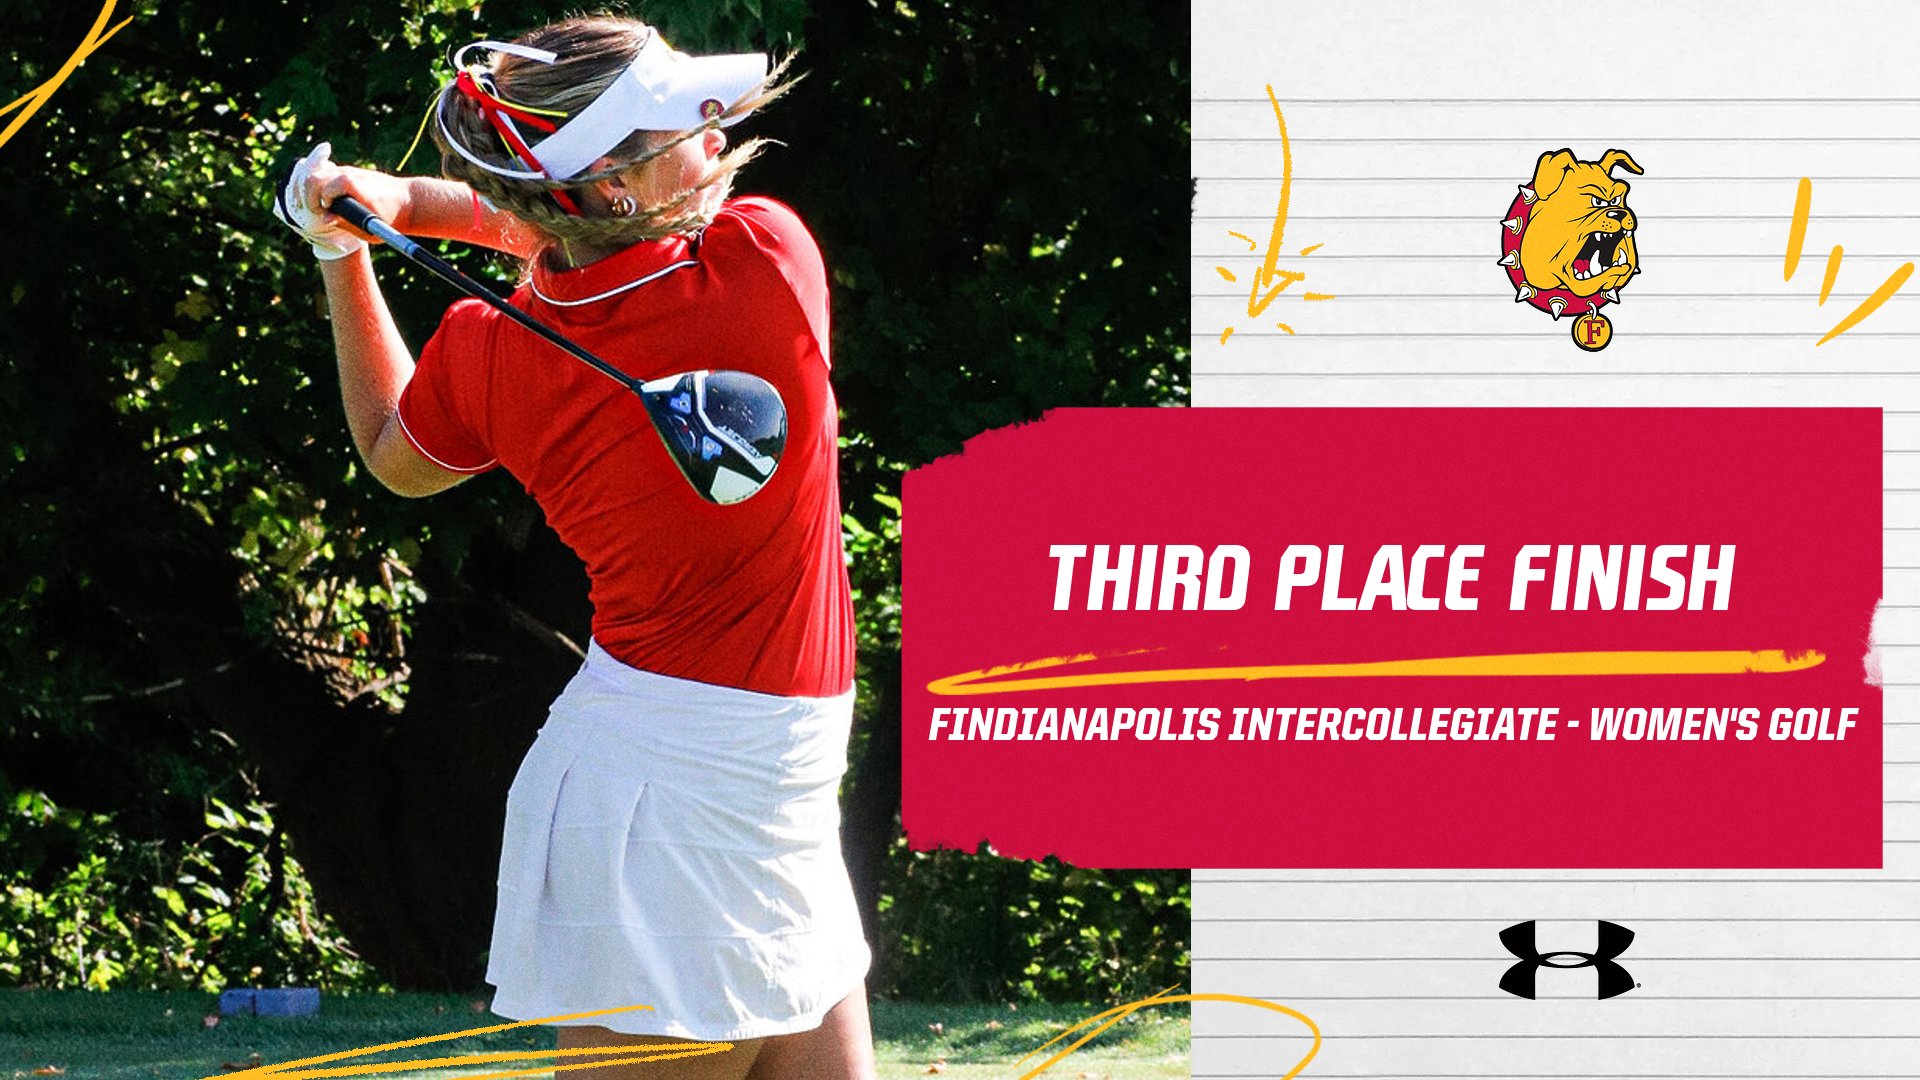 Bulldog Women's Golf Takes Third Place Overall At FIndianapolis Intercollegiate Event